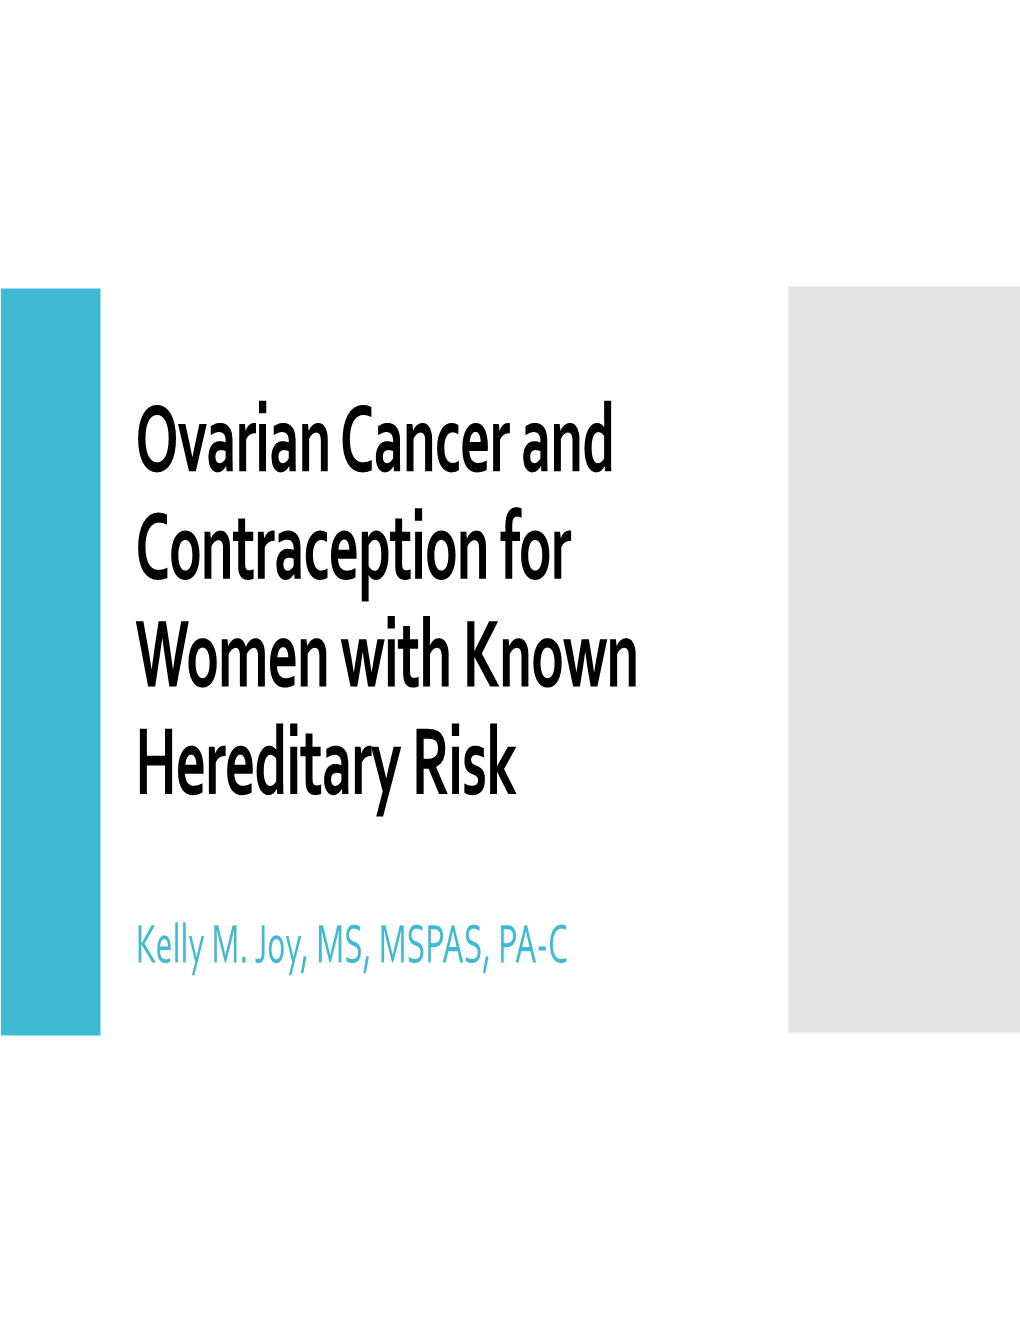 Ovarian Cancer and Contraception for Women with Known Hereditary Risk